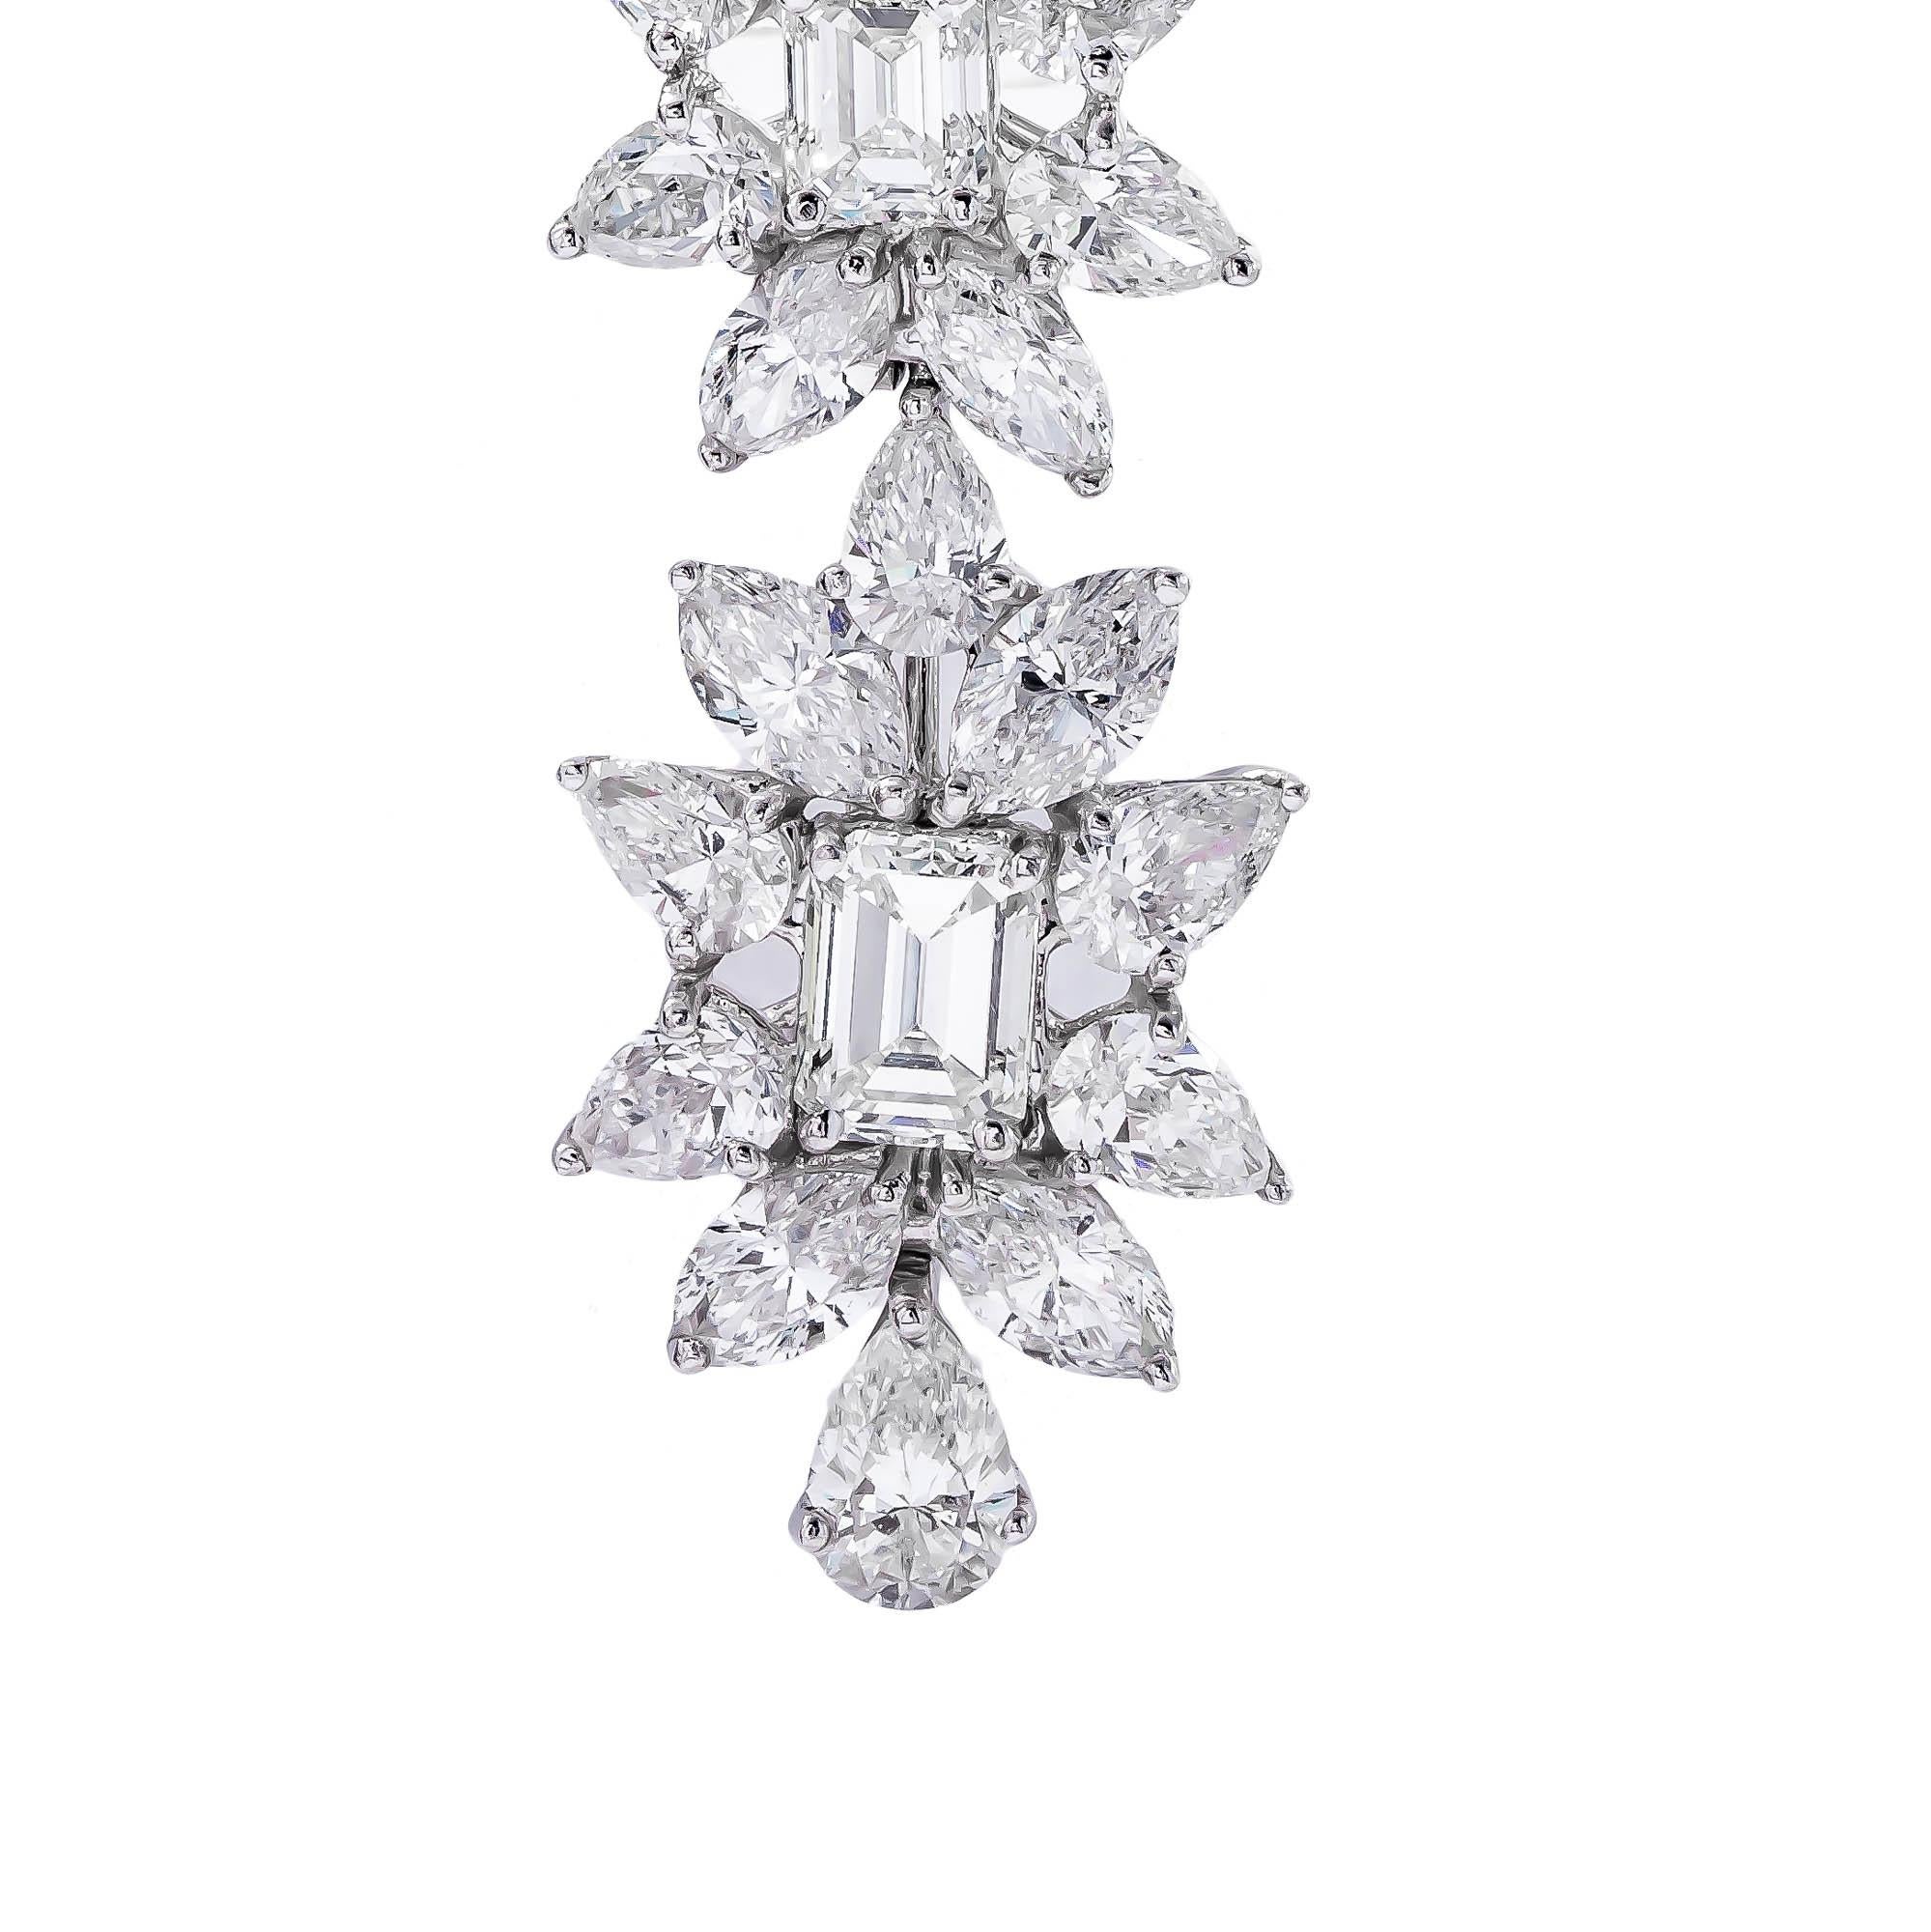 Platinum 38.50 carat diamond fancy flower drop earrings featuring emerald-cut diamonds, pear-shape diamonds, and marquise-cut diamonds, with a color and clarity of F VVS2-VS1 respectively. They measure 3.5 inches long
